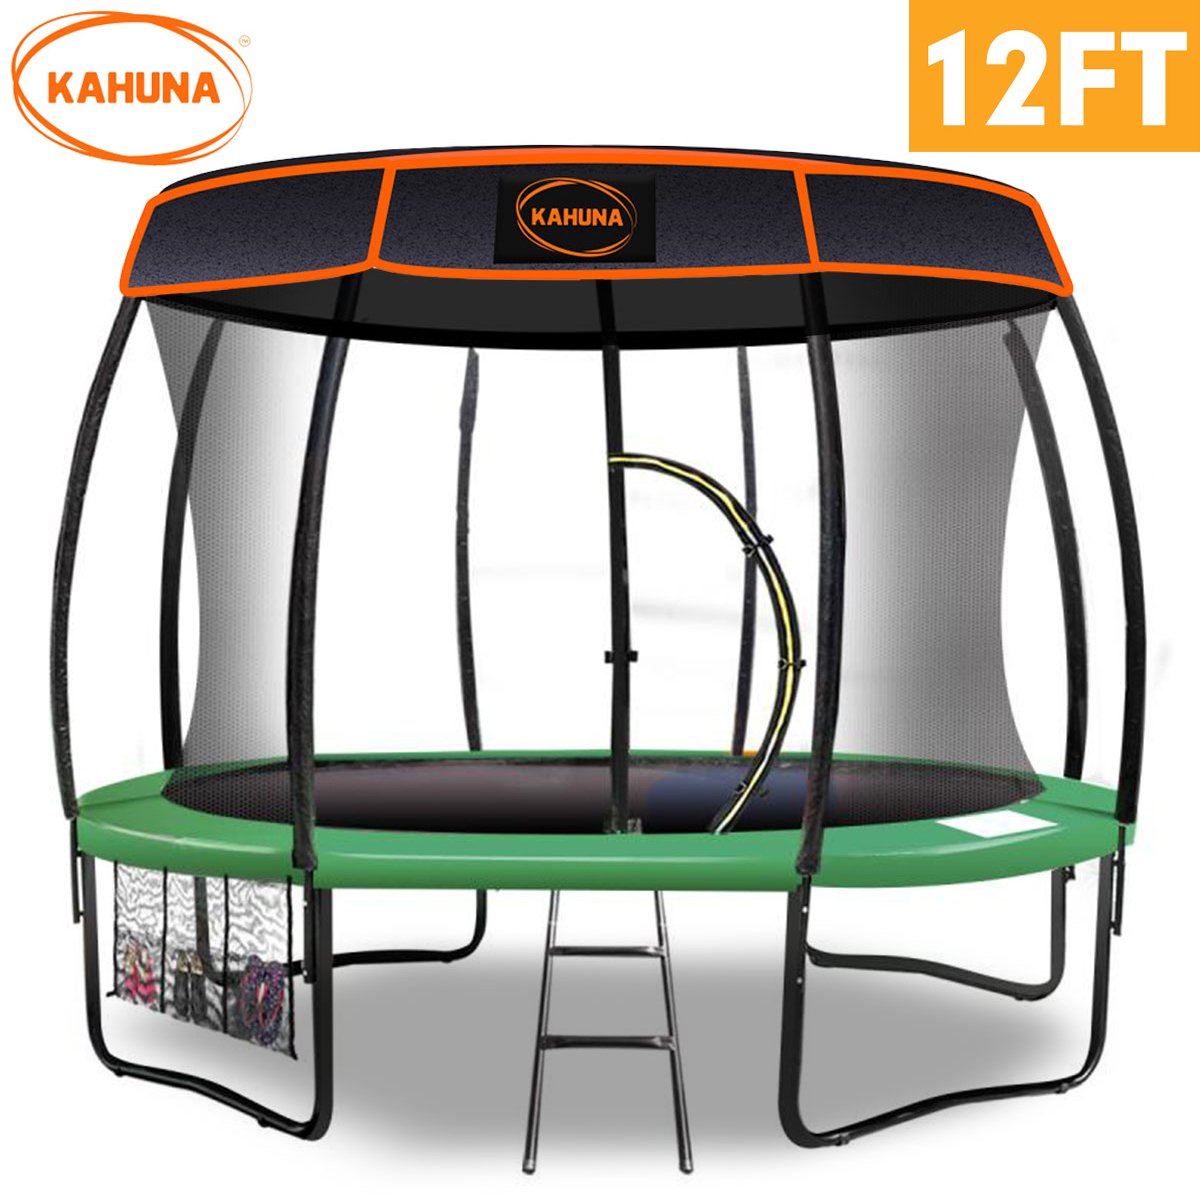 Kahuna Trampoline 12 ft with Roof-Green